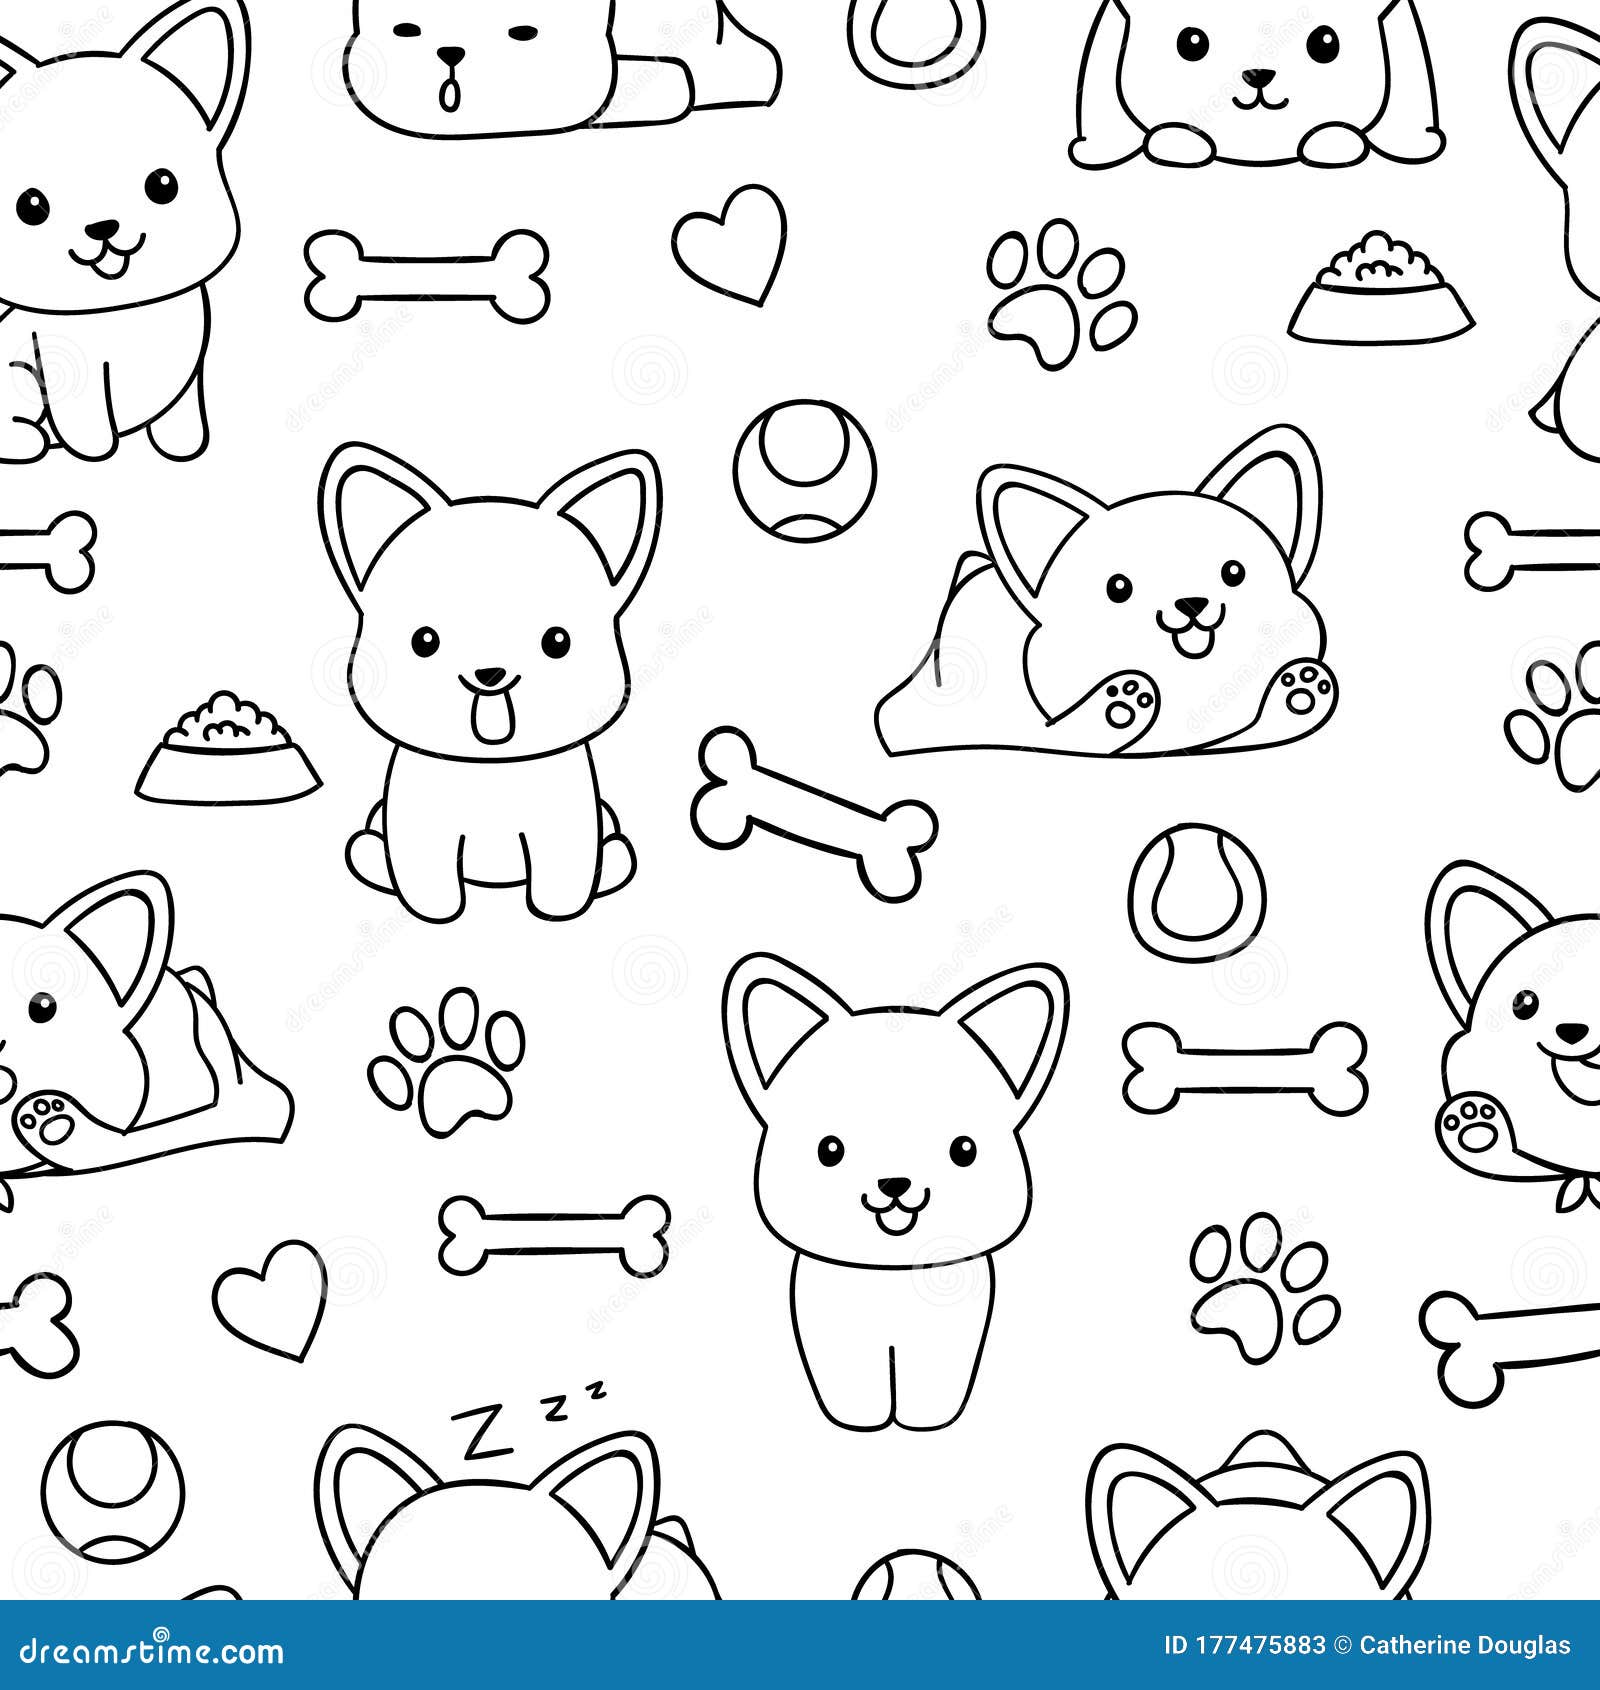 Coloring Page Printable instant download PNG files 300 dpi Princess with pets doodle clipart set3